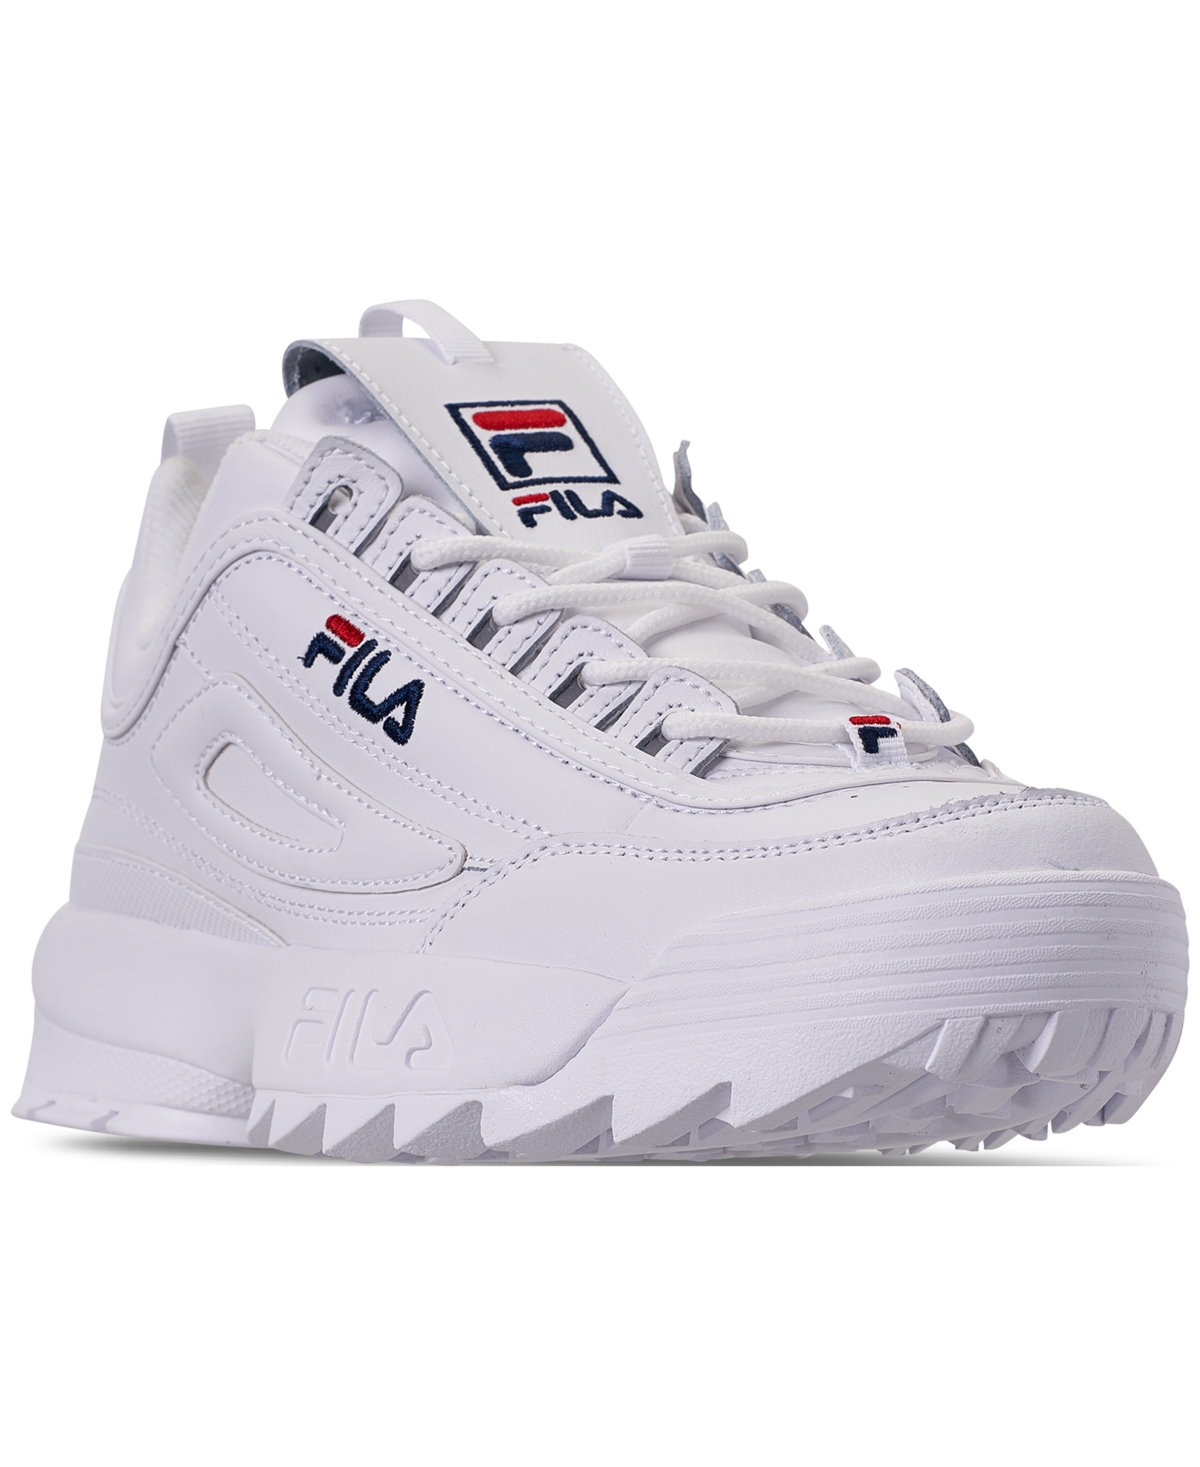 Men's Disruptor Ii Casual Athletic Sneakers from Finish Line - WHITE/FILA NAVY/FILA RED